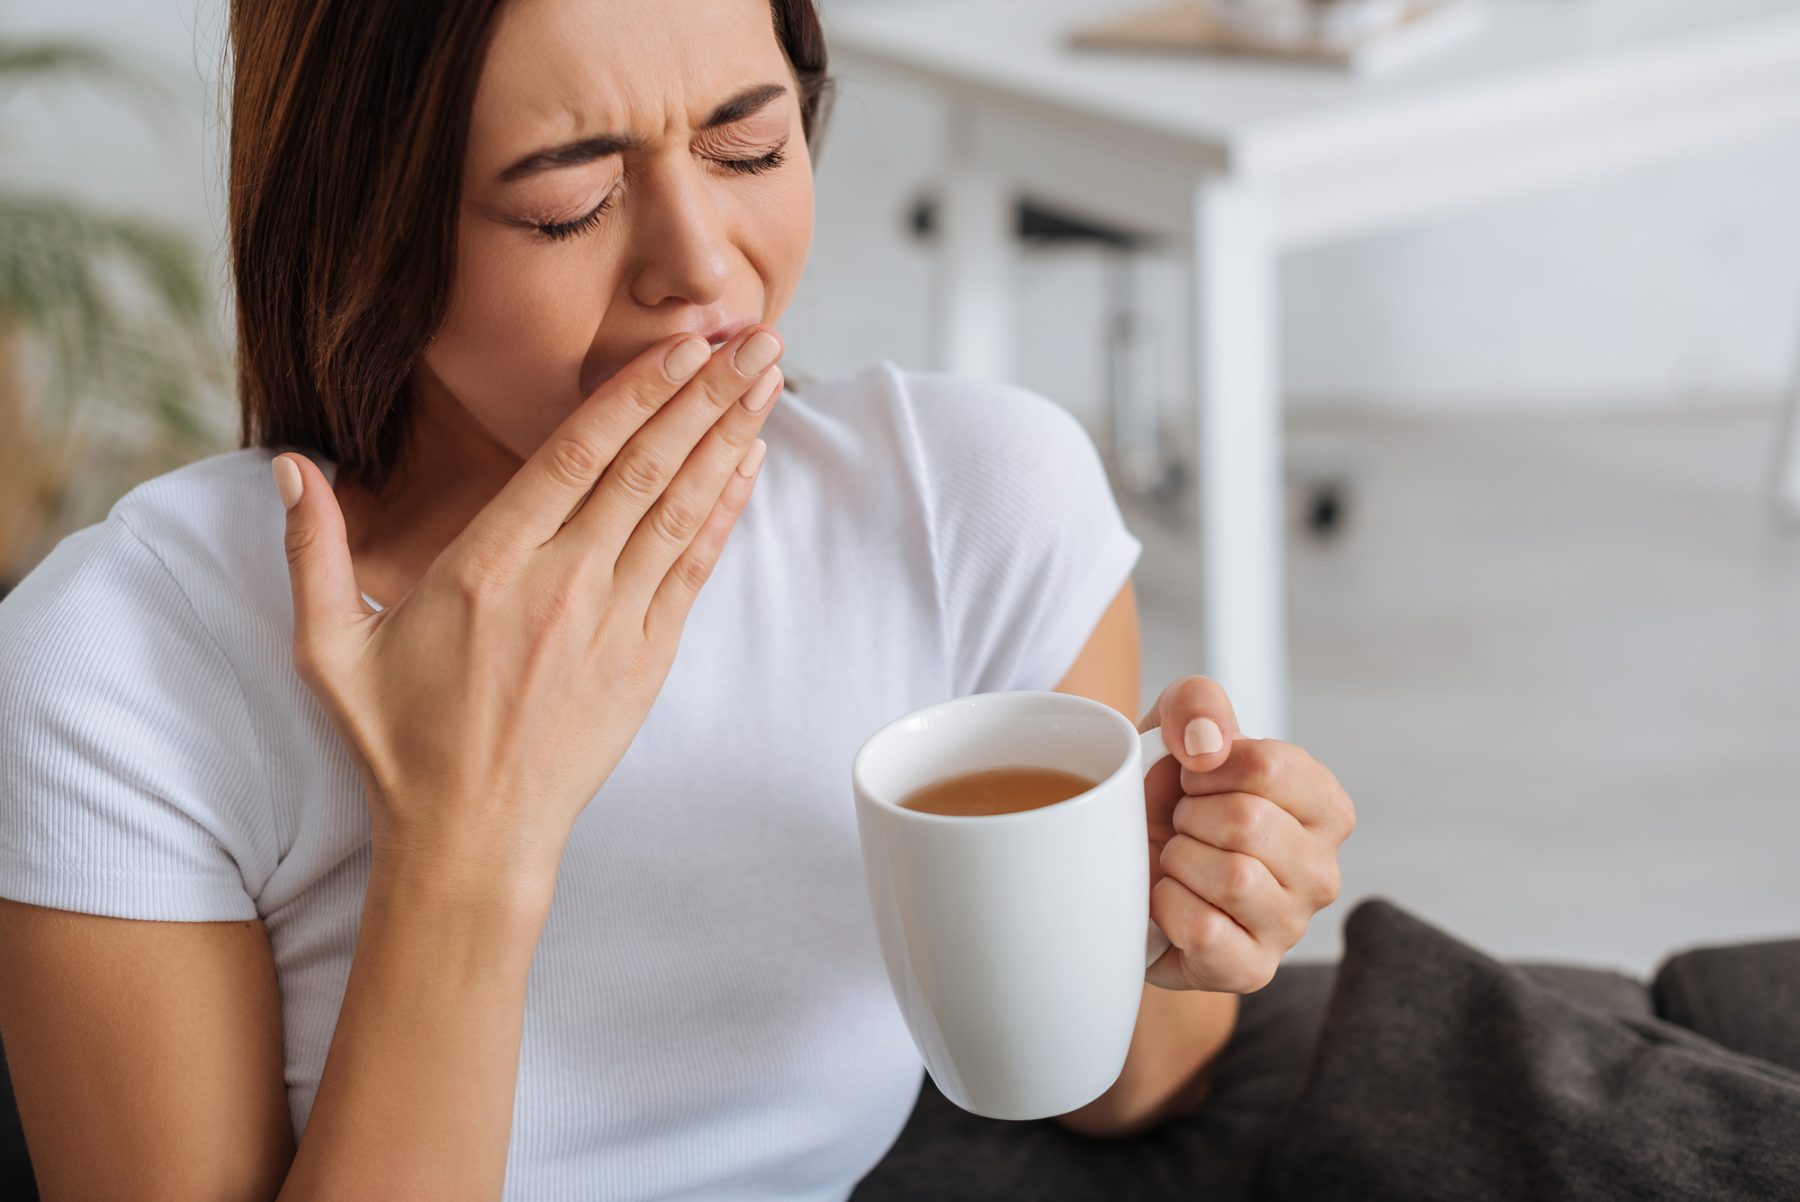 Fatigued woman yawning while drinking coffee